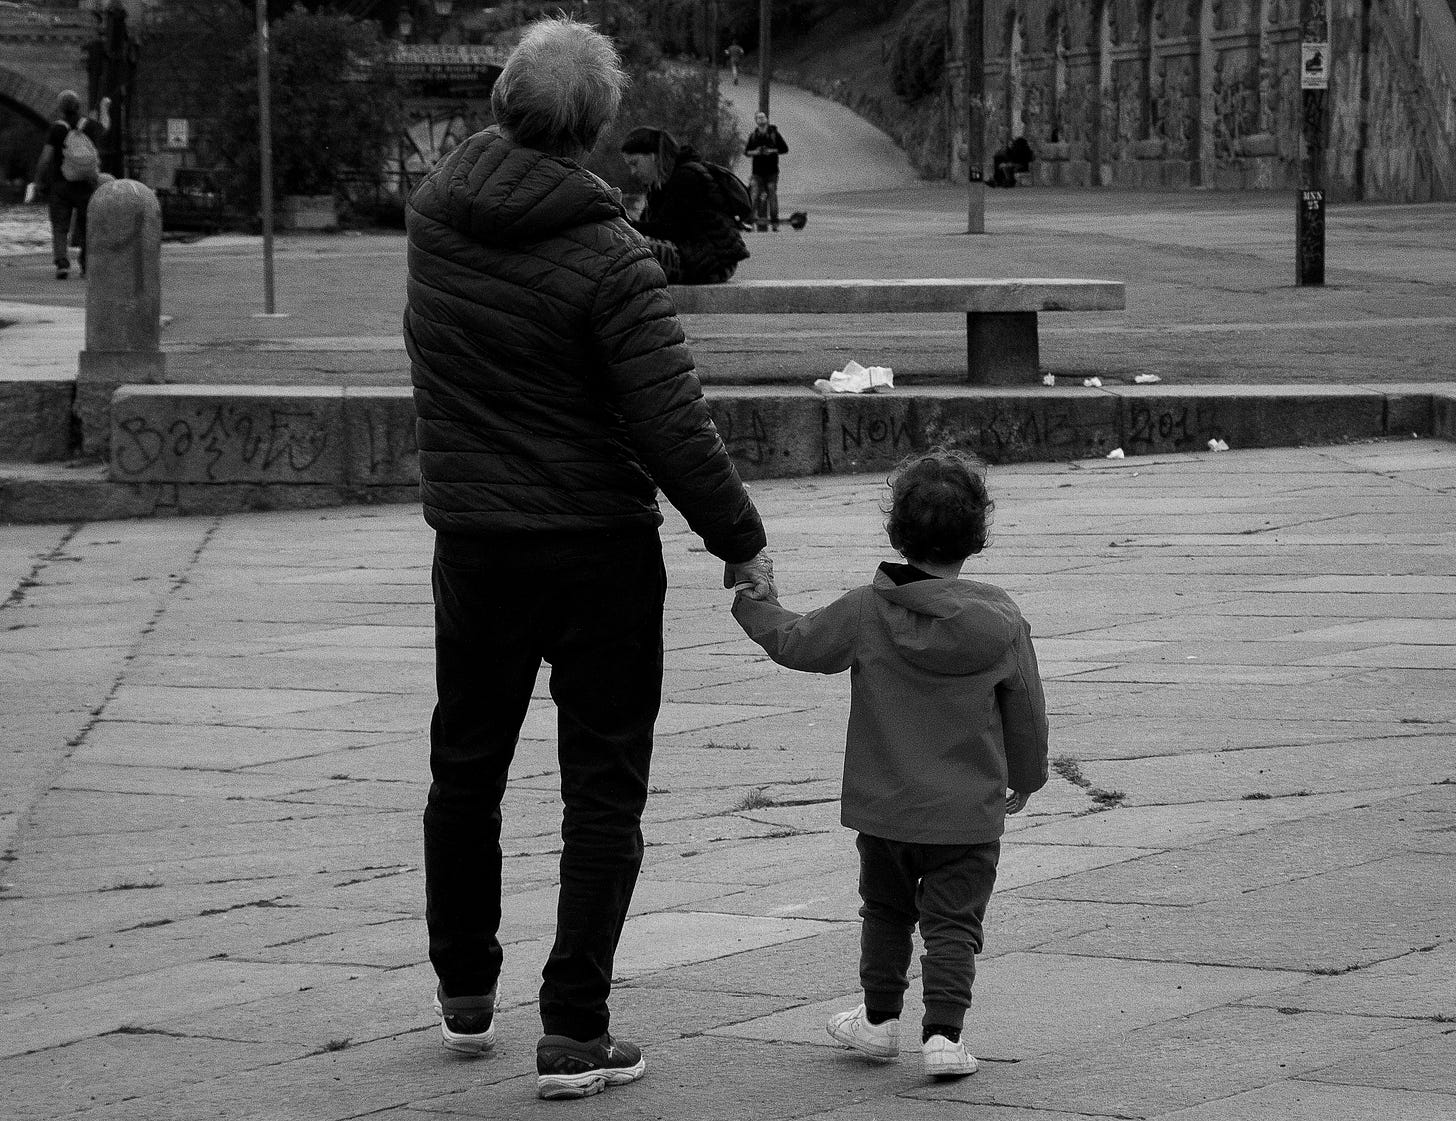 Older man holds the hand of a child. They look across a road together, backs to the camera.